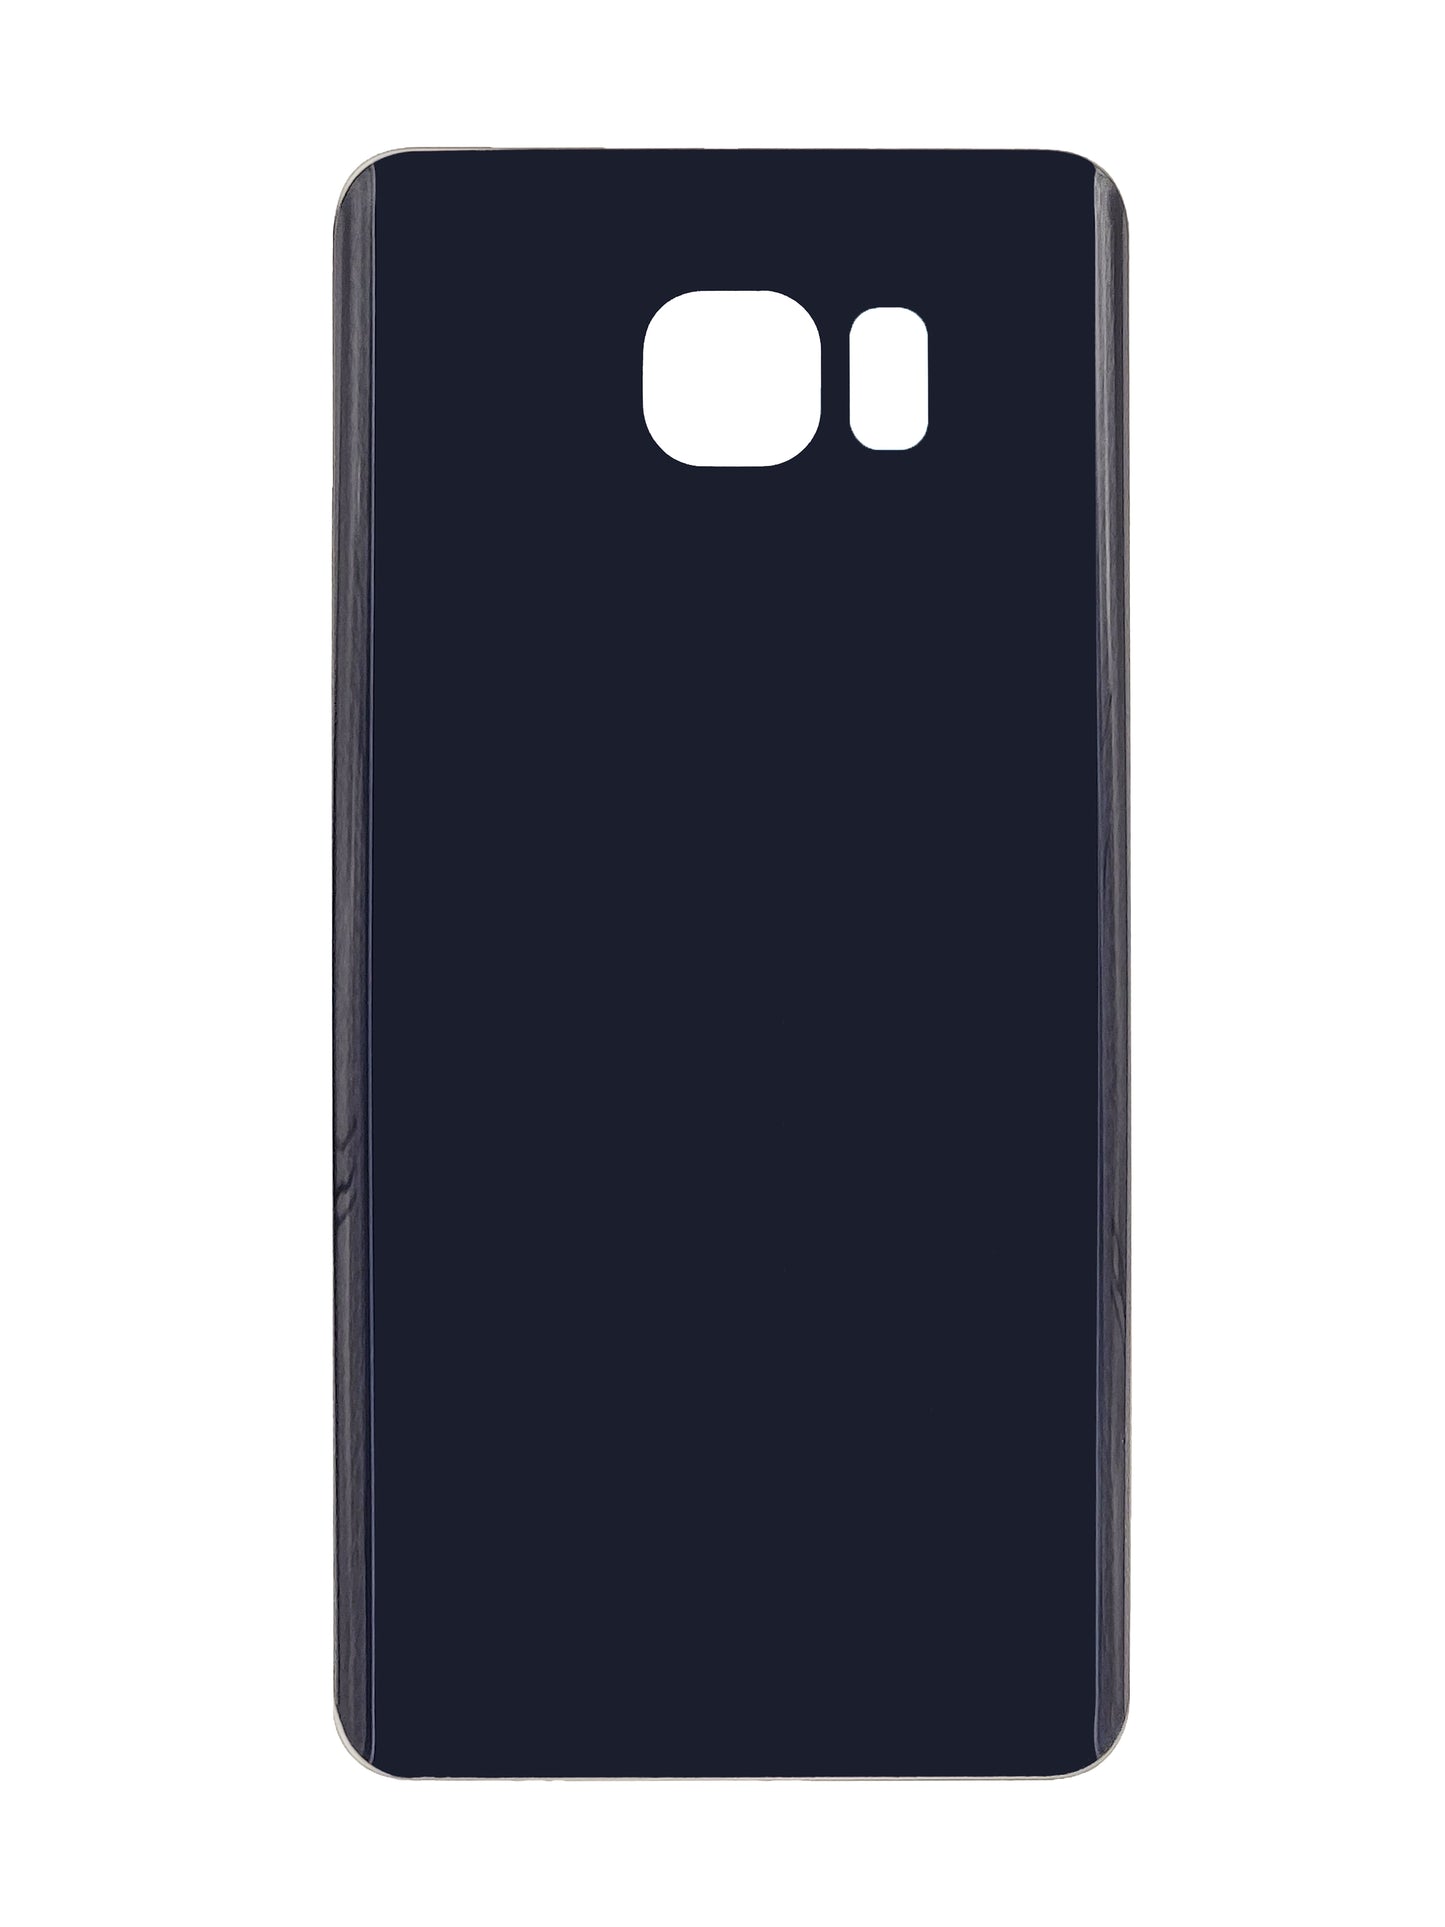 SGN Note 5 Back Cover (Black)